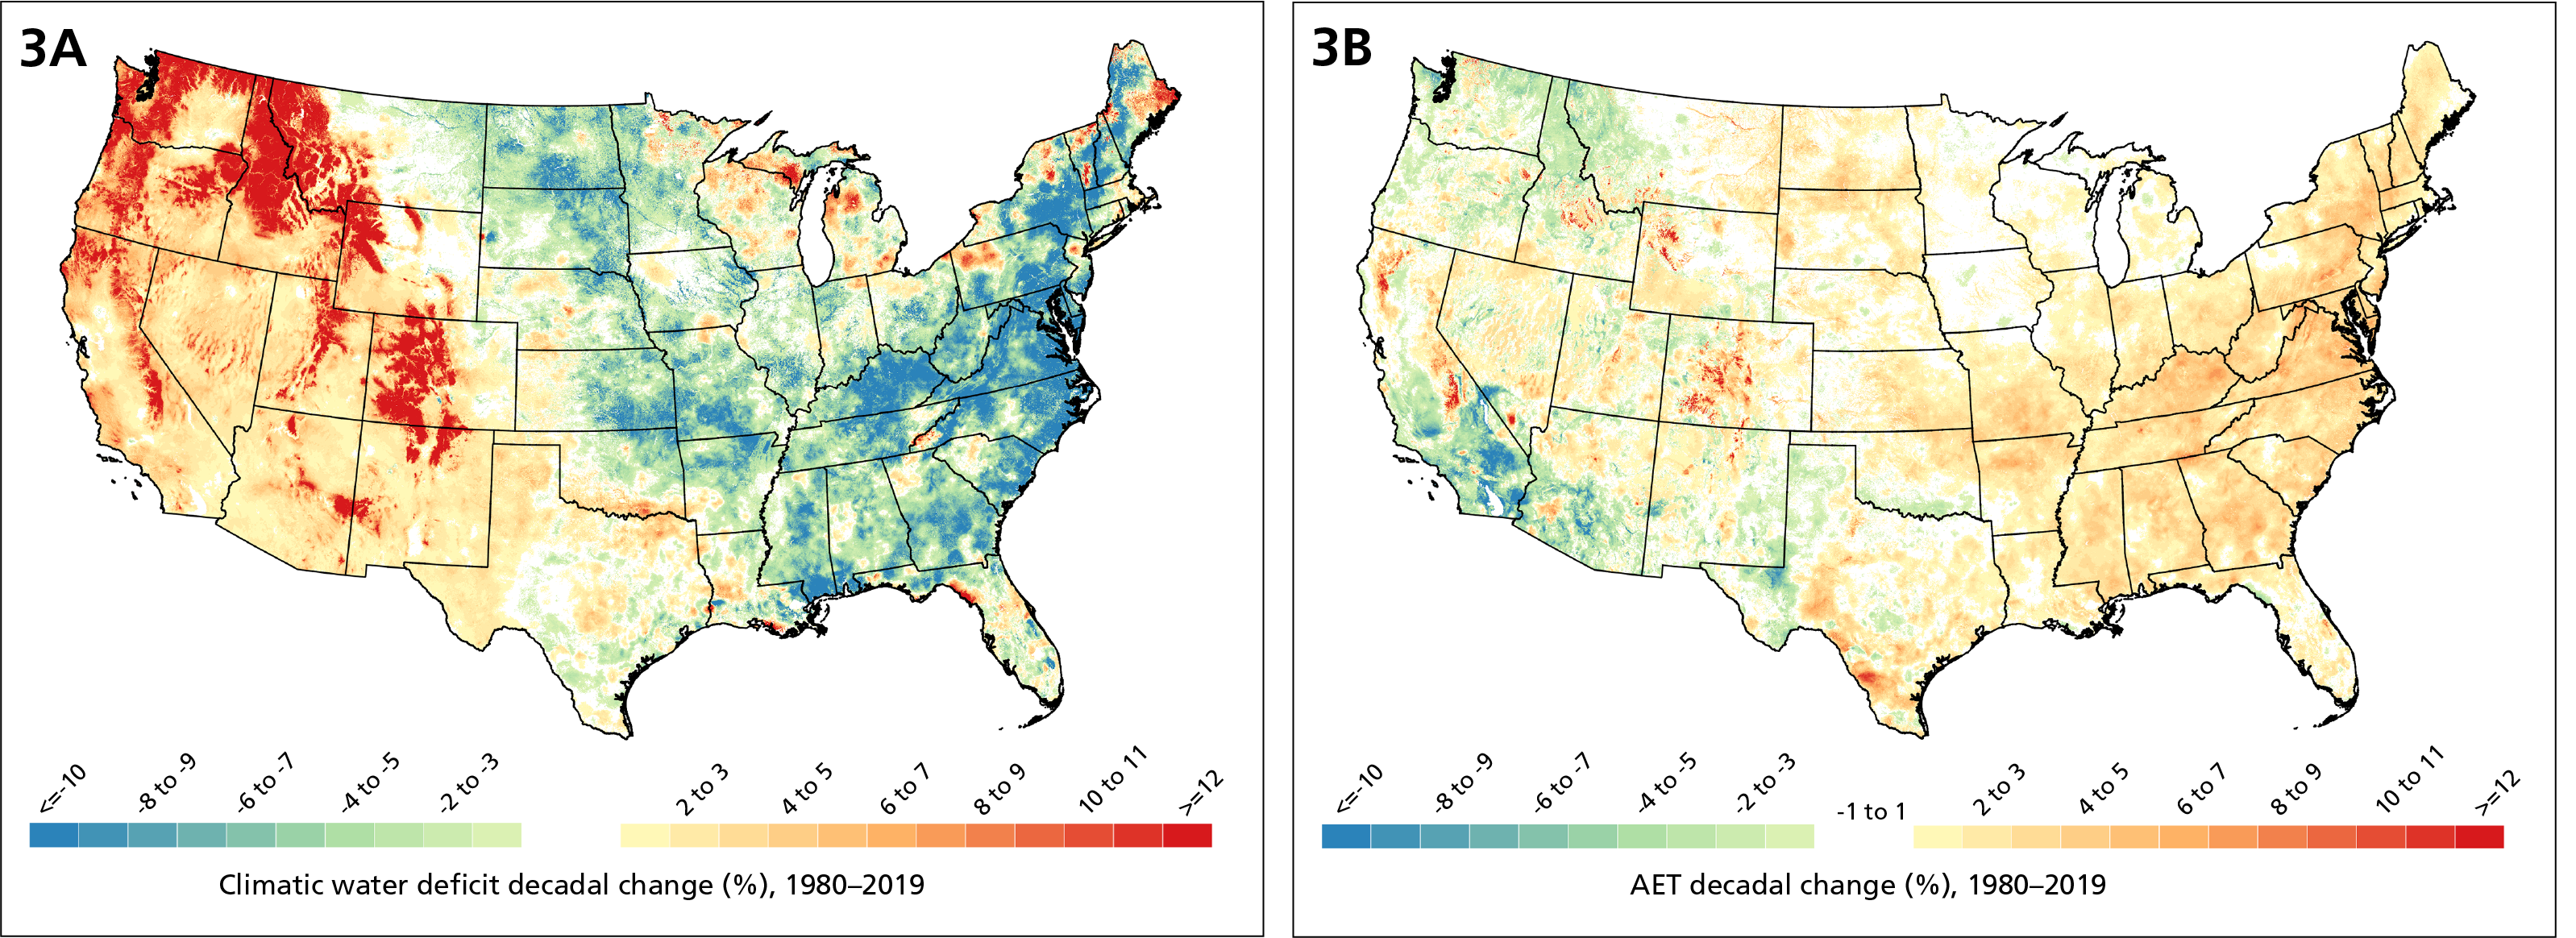 Two maps of continental US. One shows a high rate of change for water deficit in the West. The other shows a high rate of change of AET in the East.